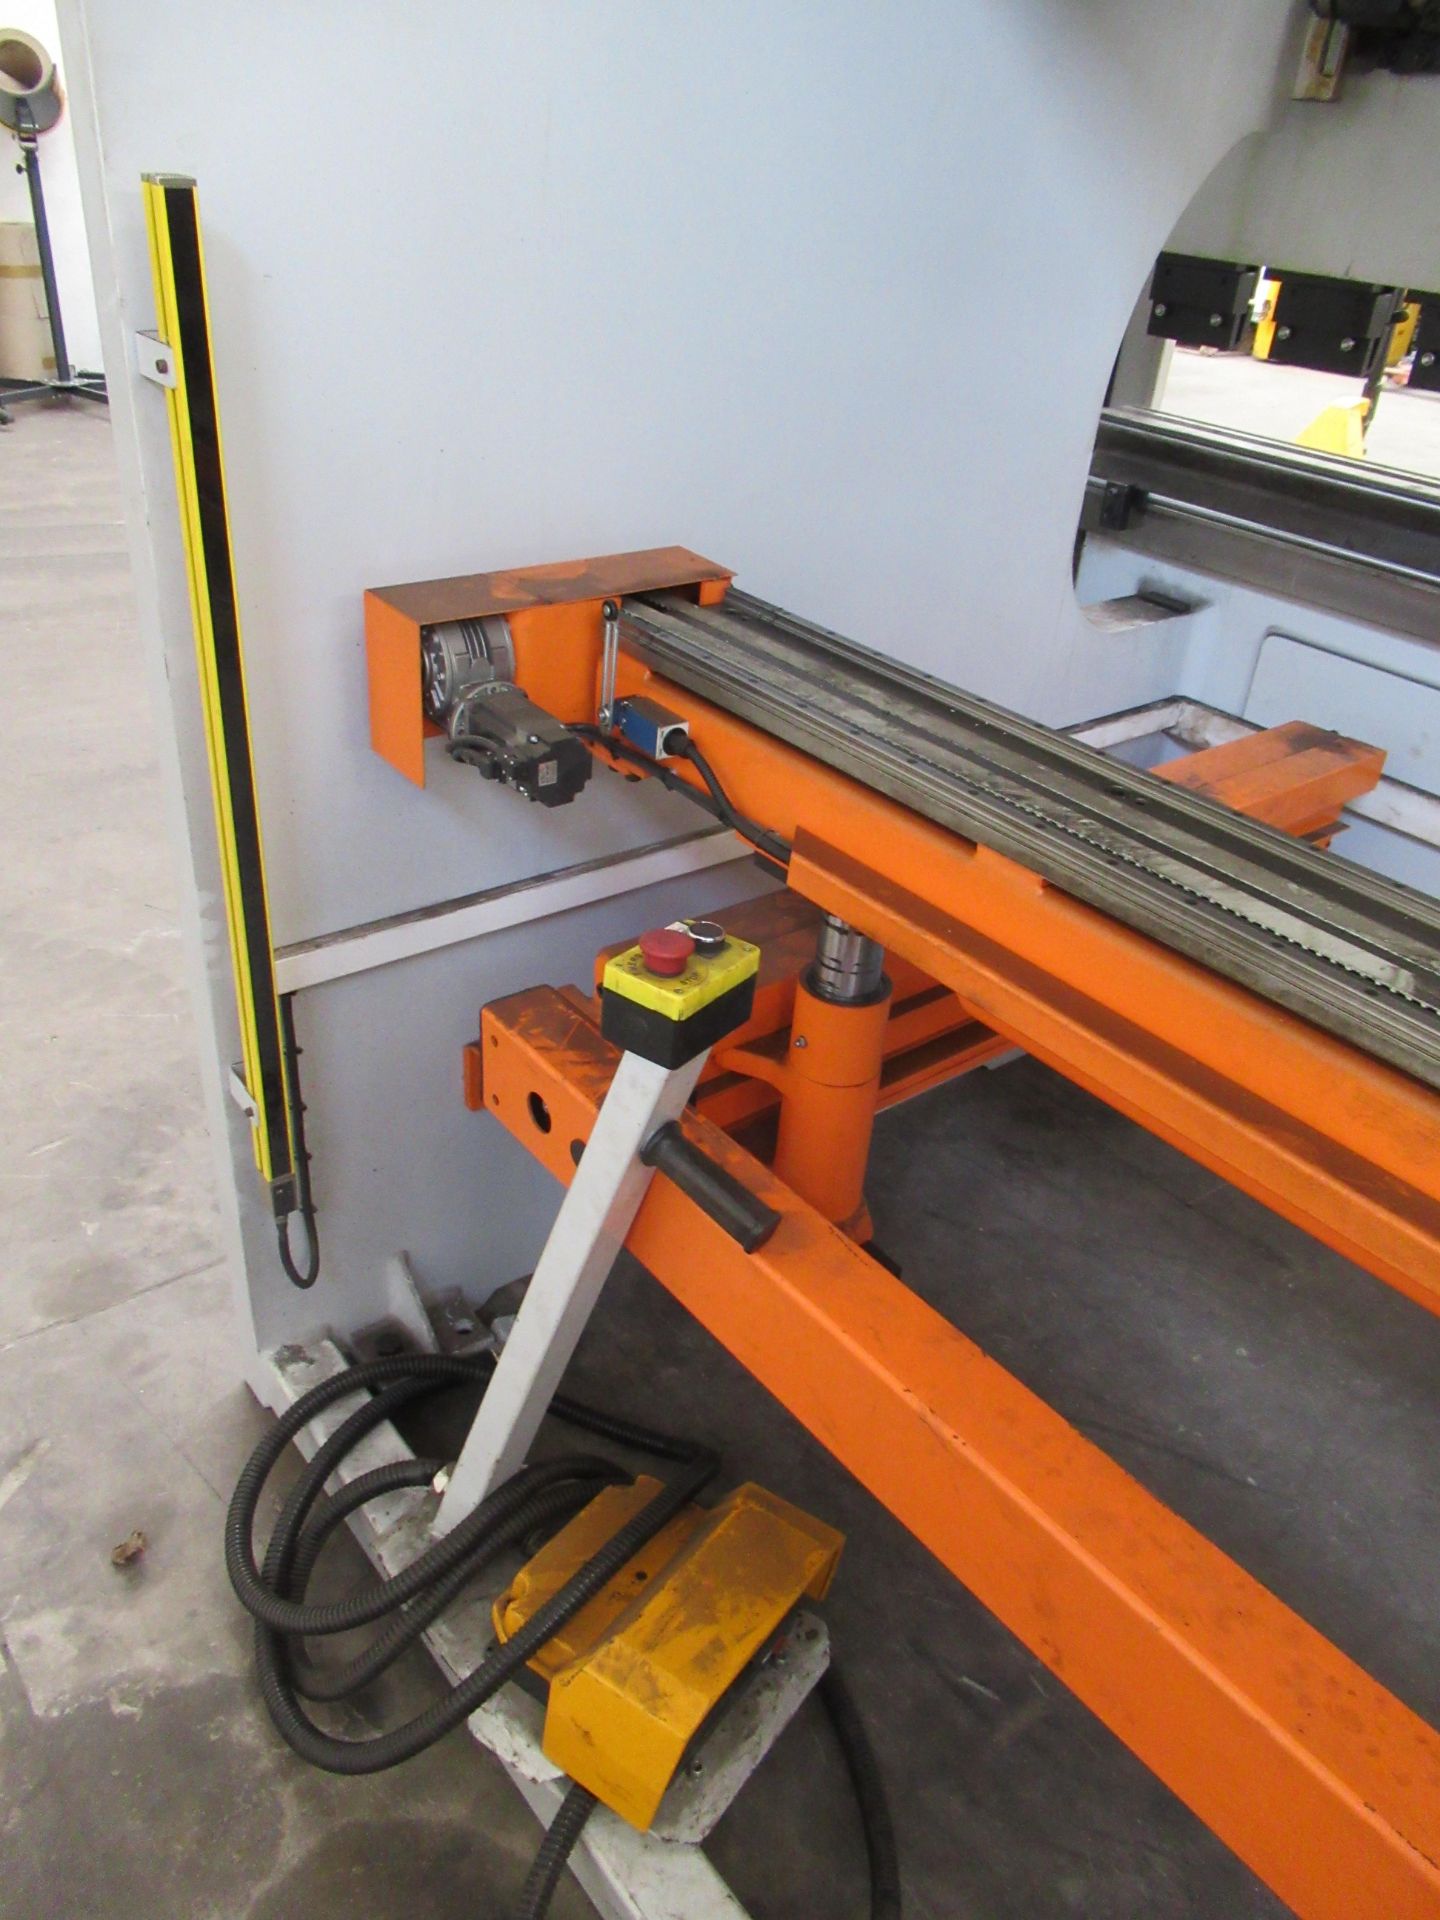 Ermaksan Speed-bend Pro 4100 x 220 CNC Hydraulic Press Brake and a selection of tooling for press br - Image 5 of 16